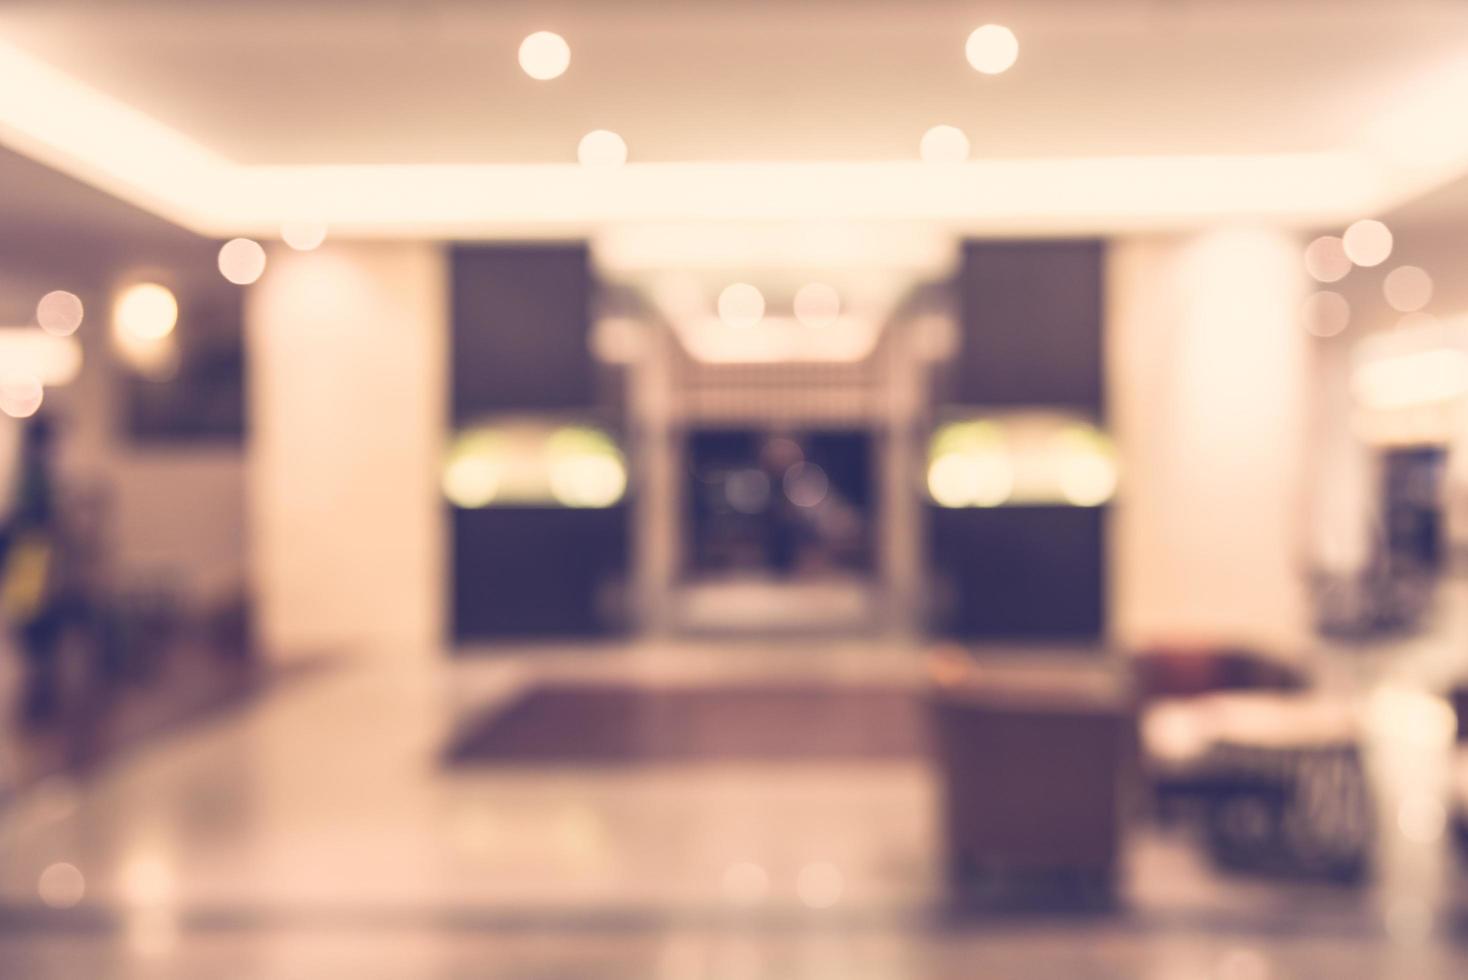 Abstract blur hotel lobby - vintage filter photo